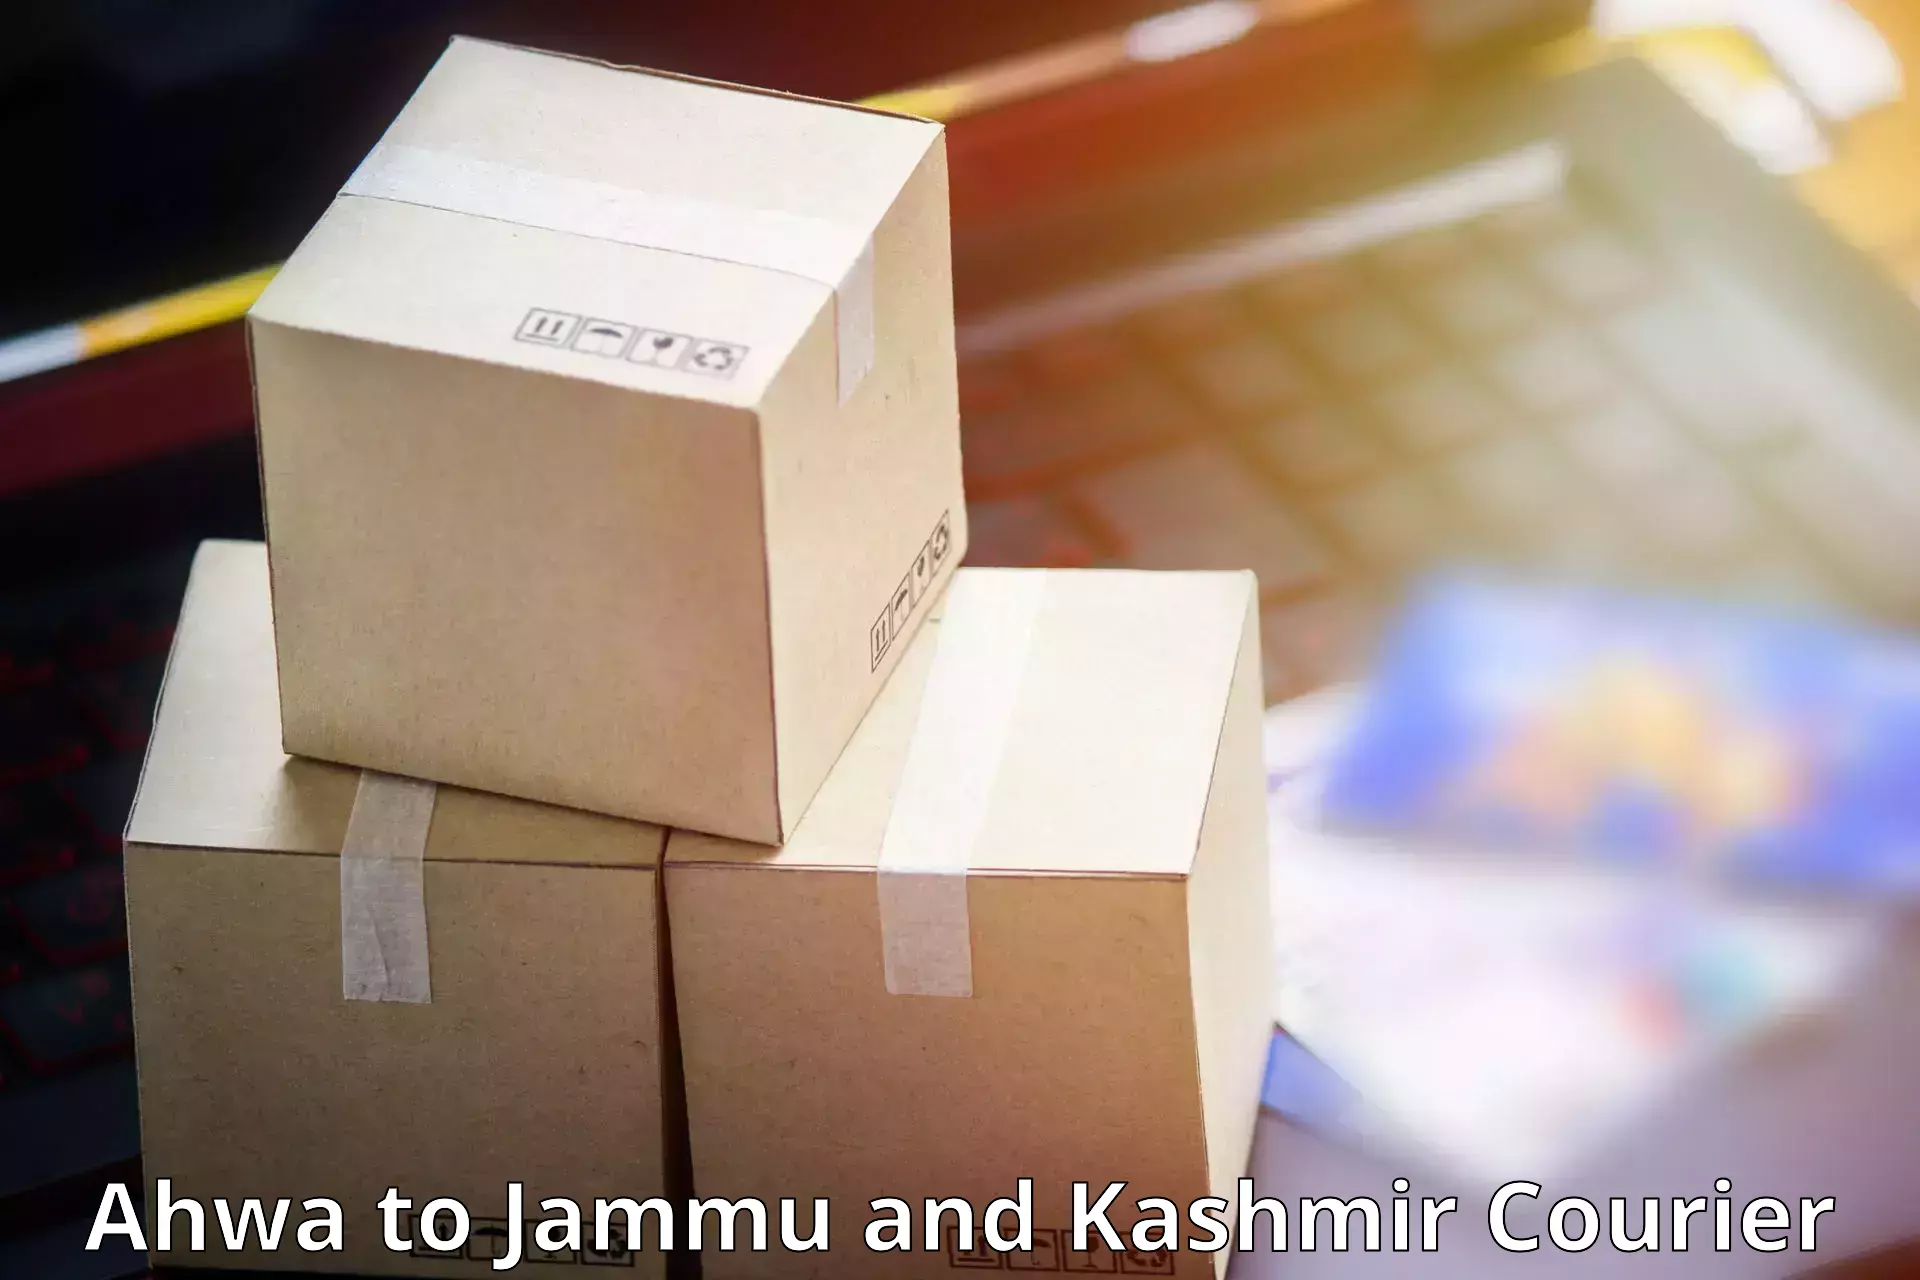 Specialized shipment handling Ahwa to University of Jammu